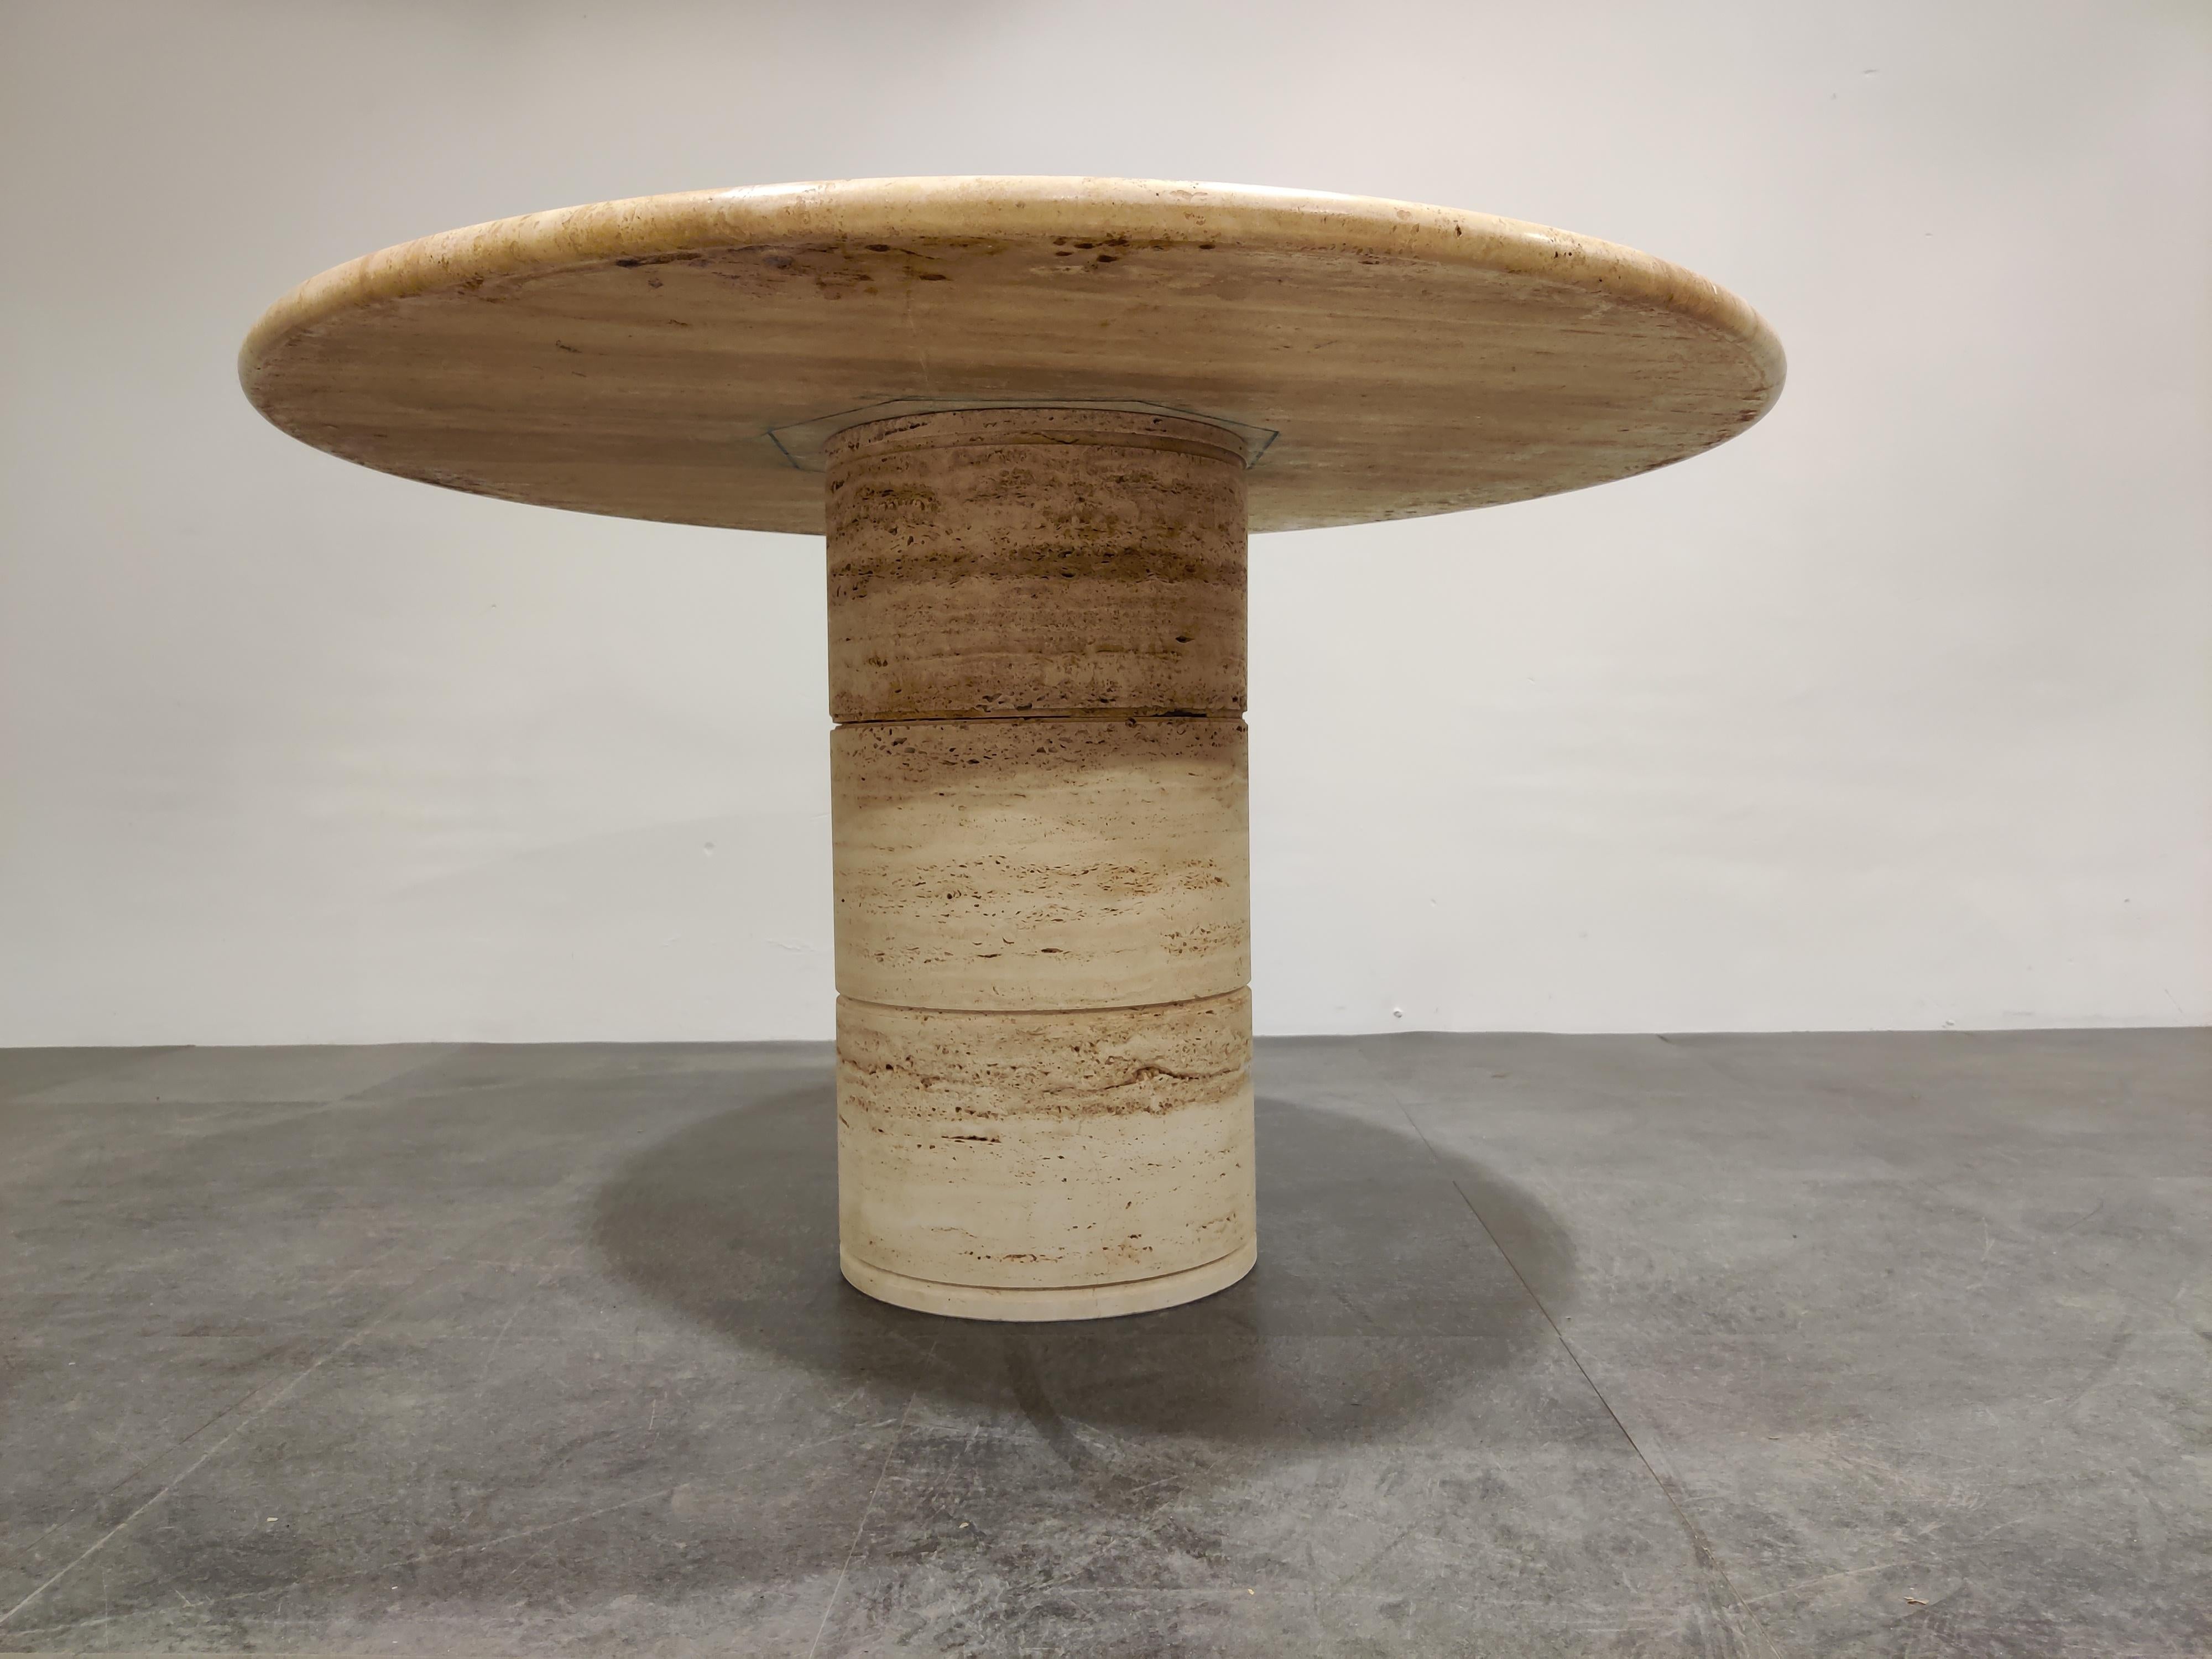 Beautiful pedestal base dining table made from travertine stone.

The table has a beautiful base with the natural 'holes' in the stone.

Beautiful rounded top.

Good condition

1970s, Italy

Measures: Height 74cm/29.13